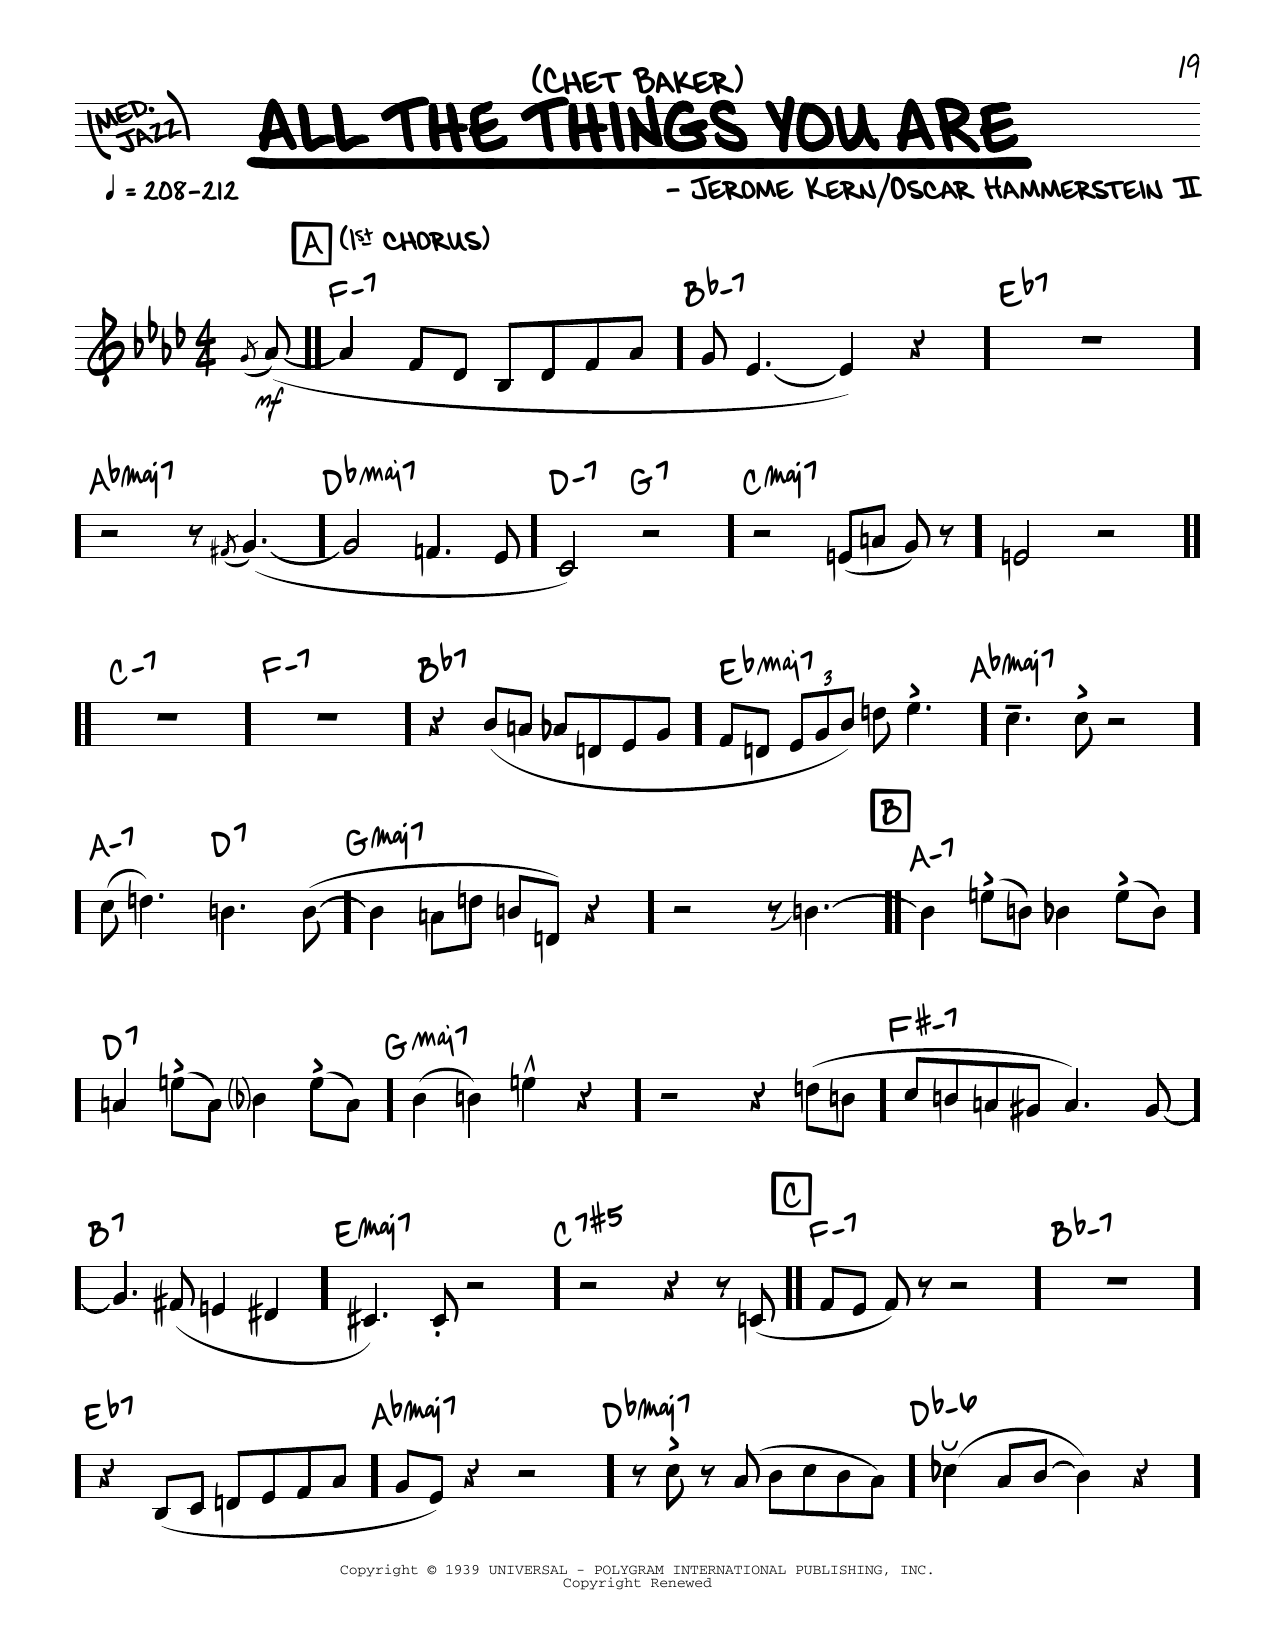 Download Chet Baker All The Things You Are (solo only) Sheet Music